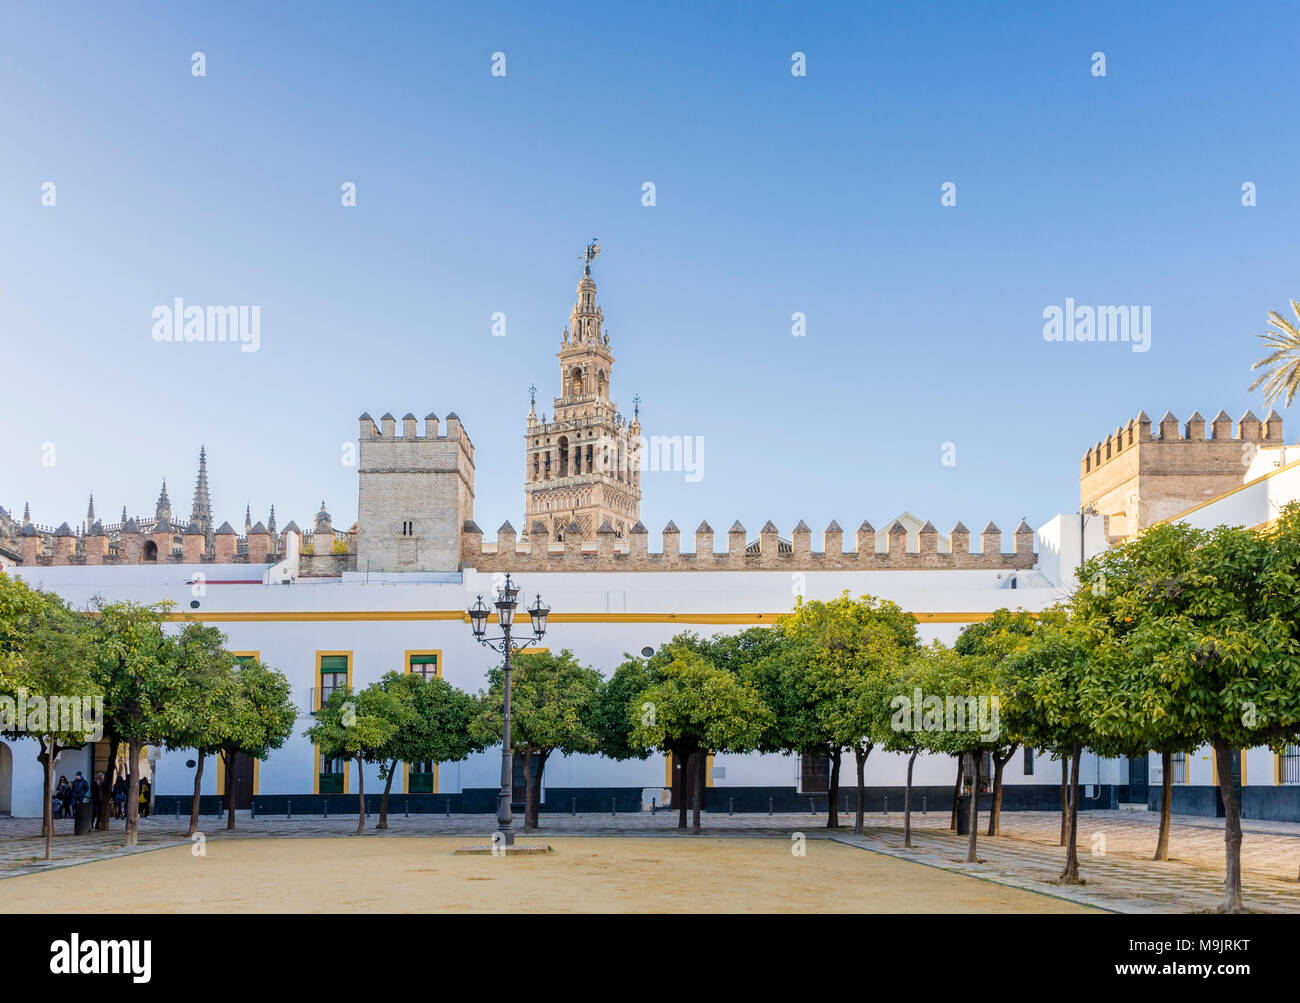 Patio de Banderas plaza/courtyard/square in the historic city centre of Seville with the Giralda bell tower in the background 2018, Andalusia, Spain Stock Photo